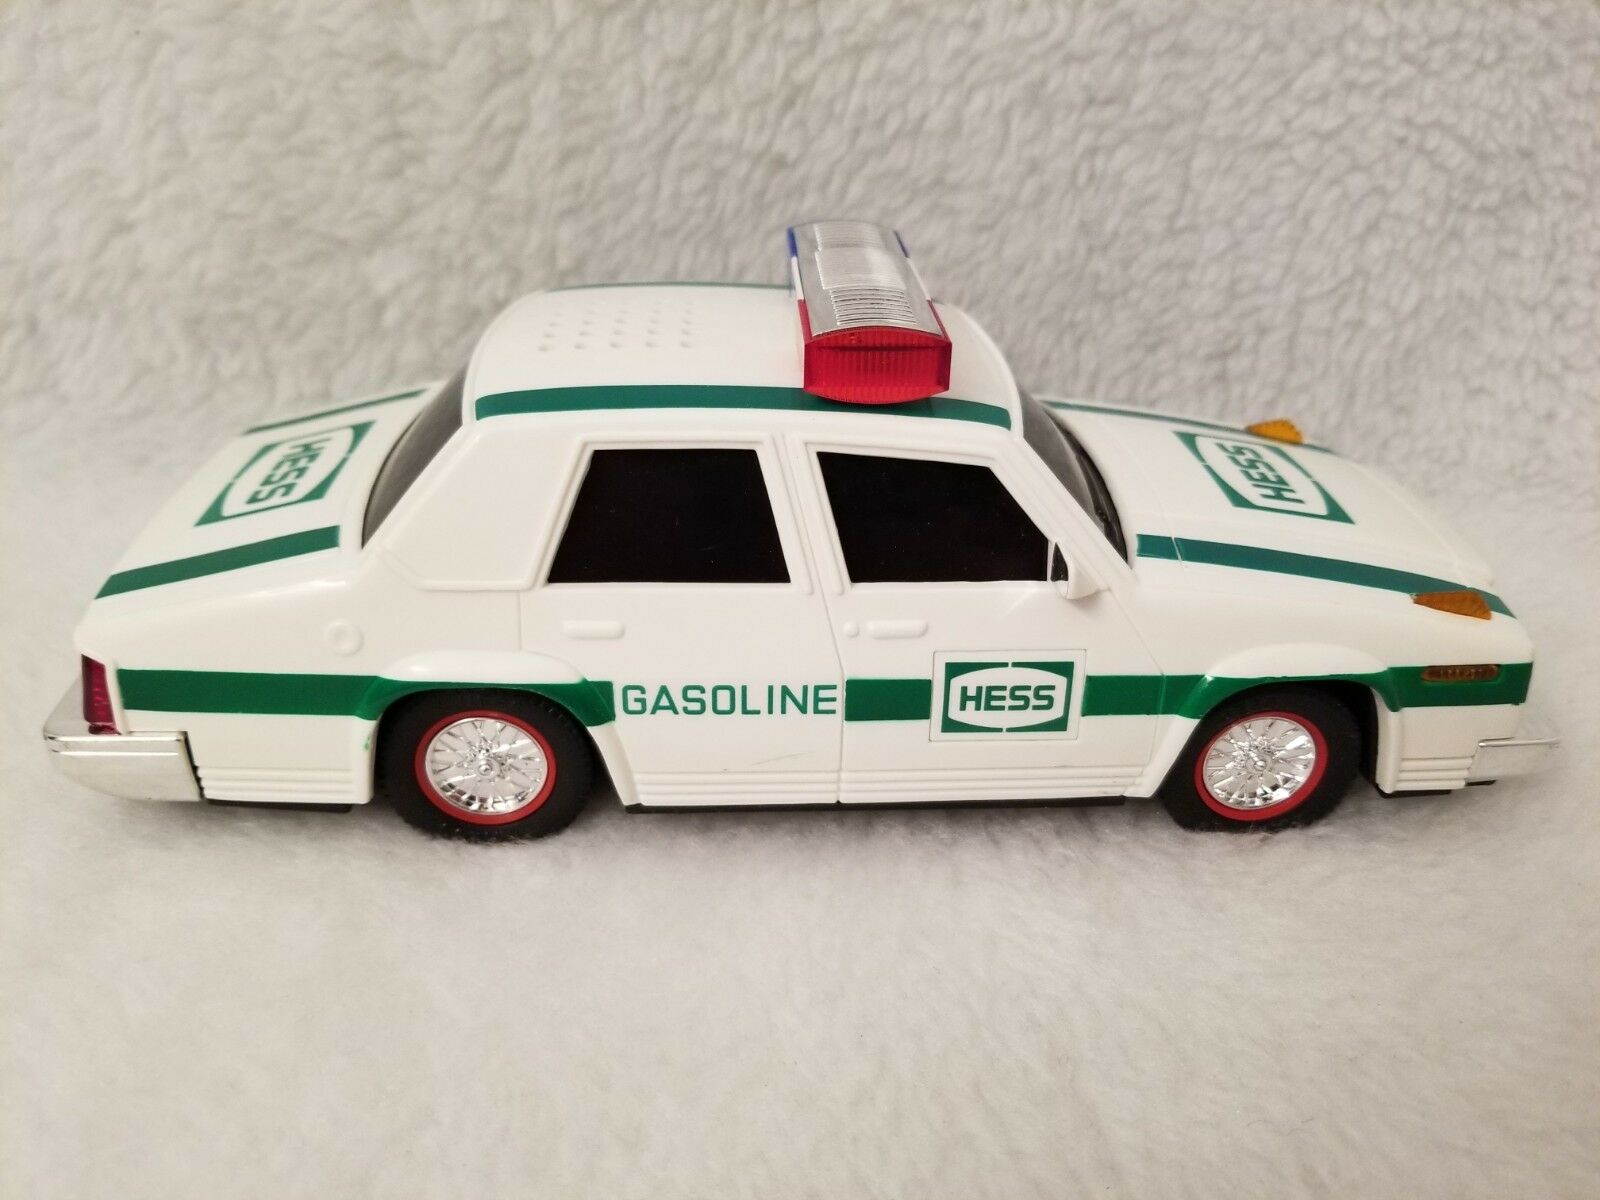 1993 HESS TRUCK Patrol Car Police Car With Original Box and Inserts